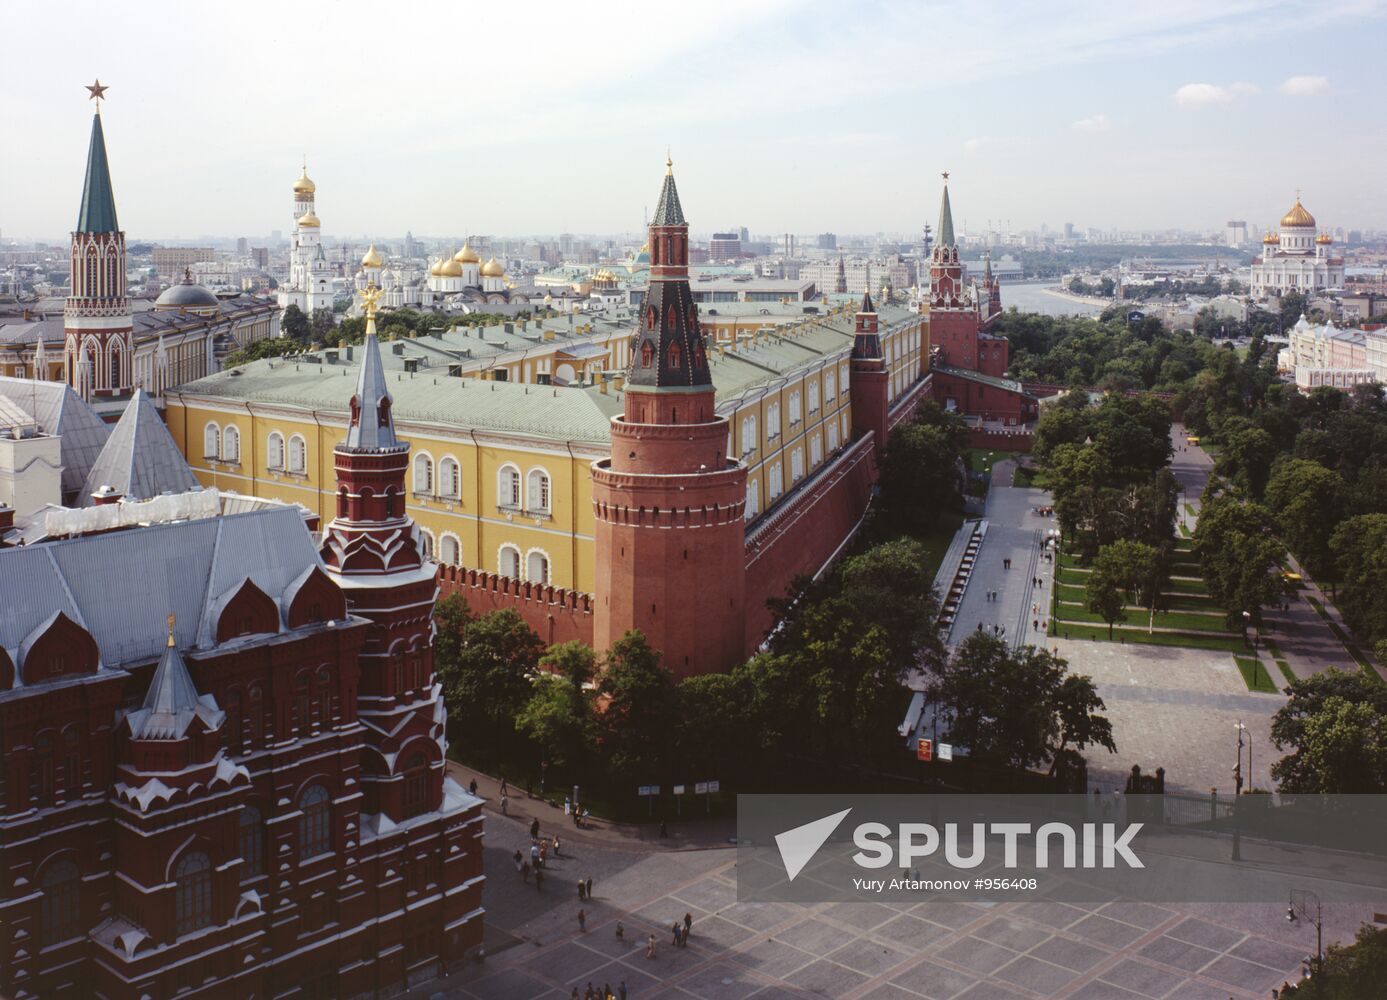 History Museum and Moscow Kremlin